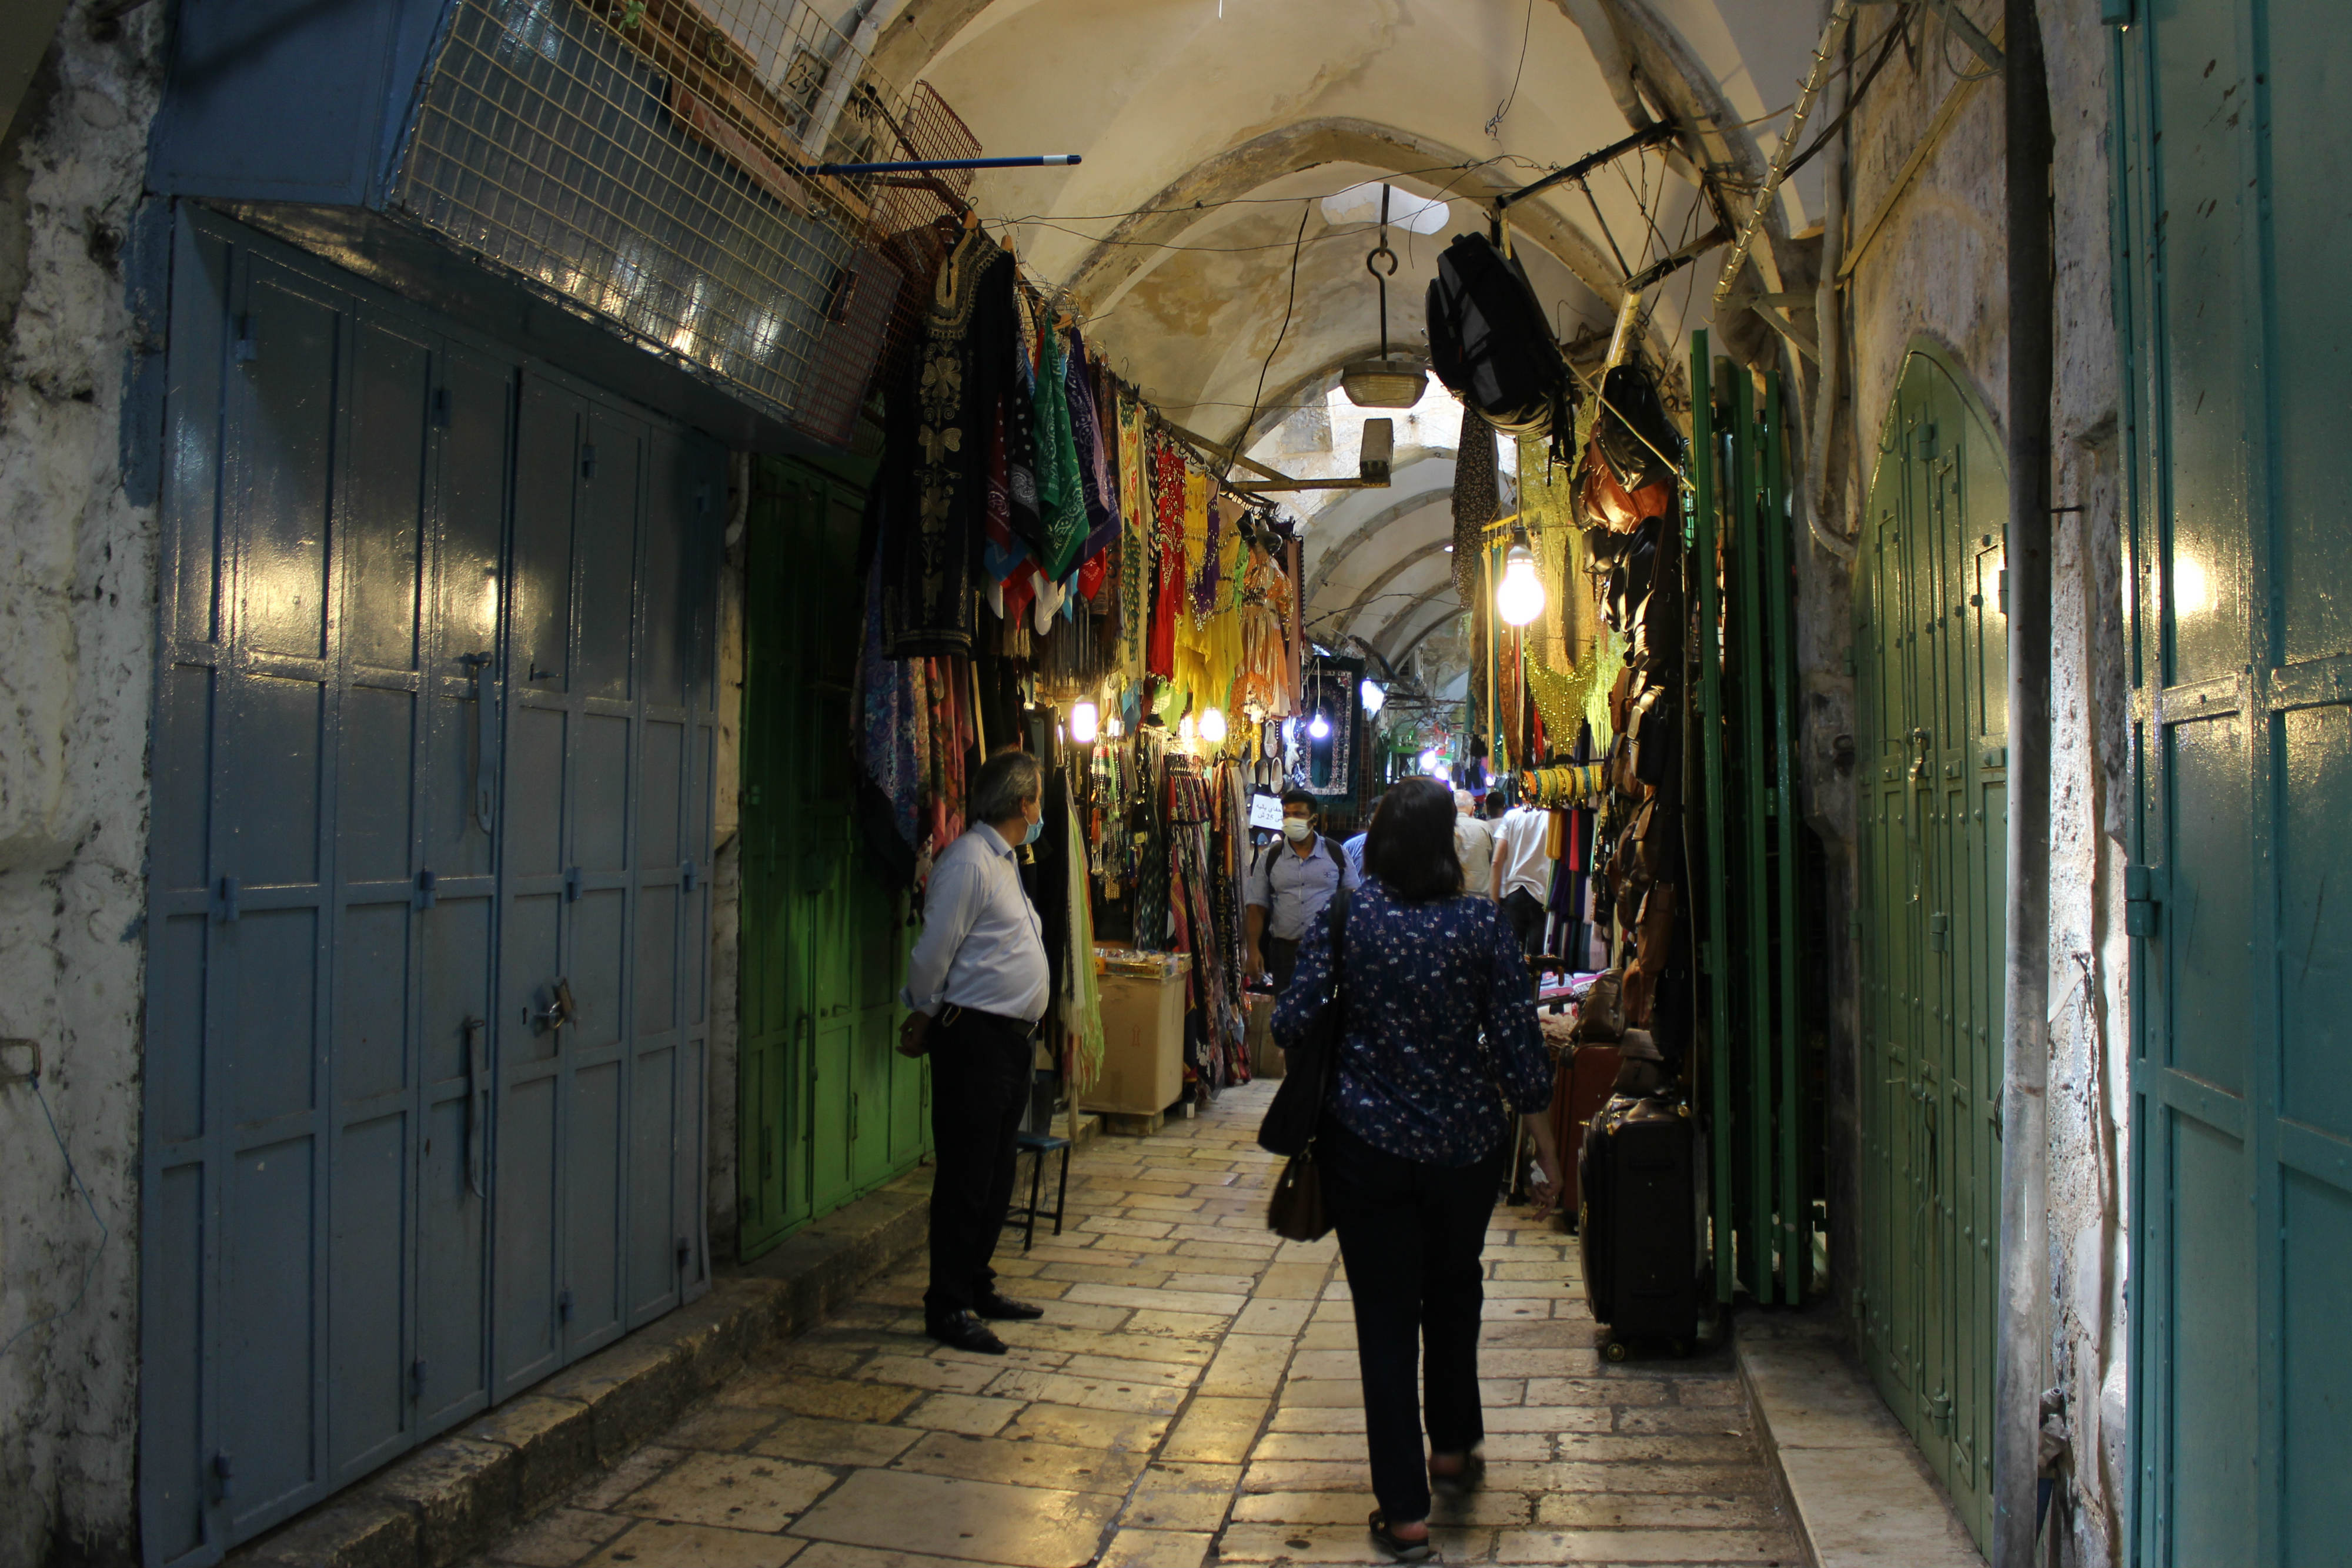 People no longer seek out the souqs due to a fear of using public transportation (MEE/Aseel Jundi)